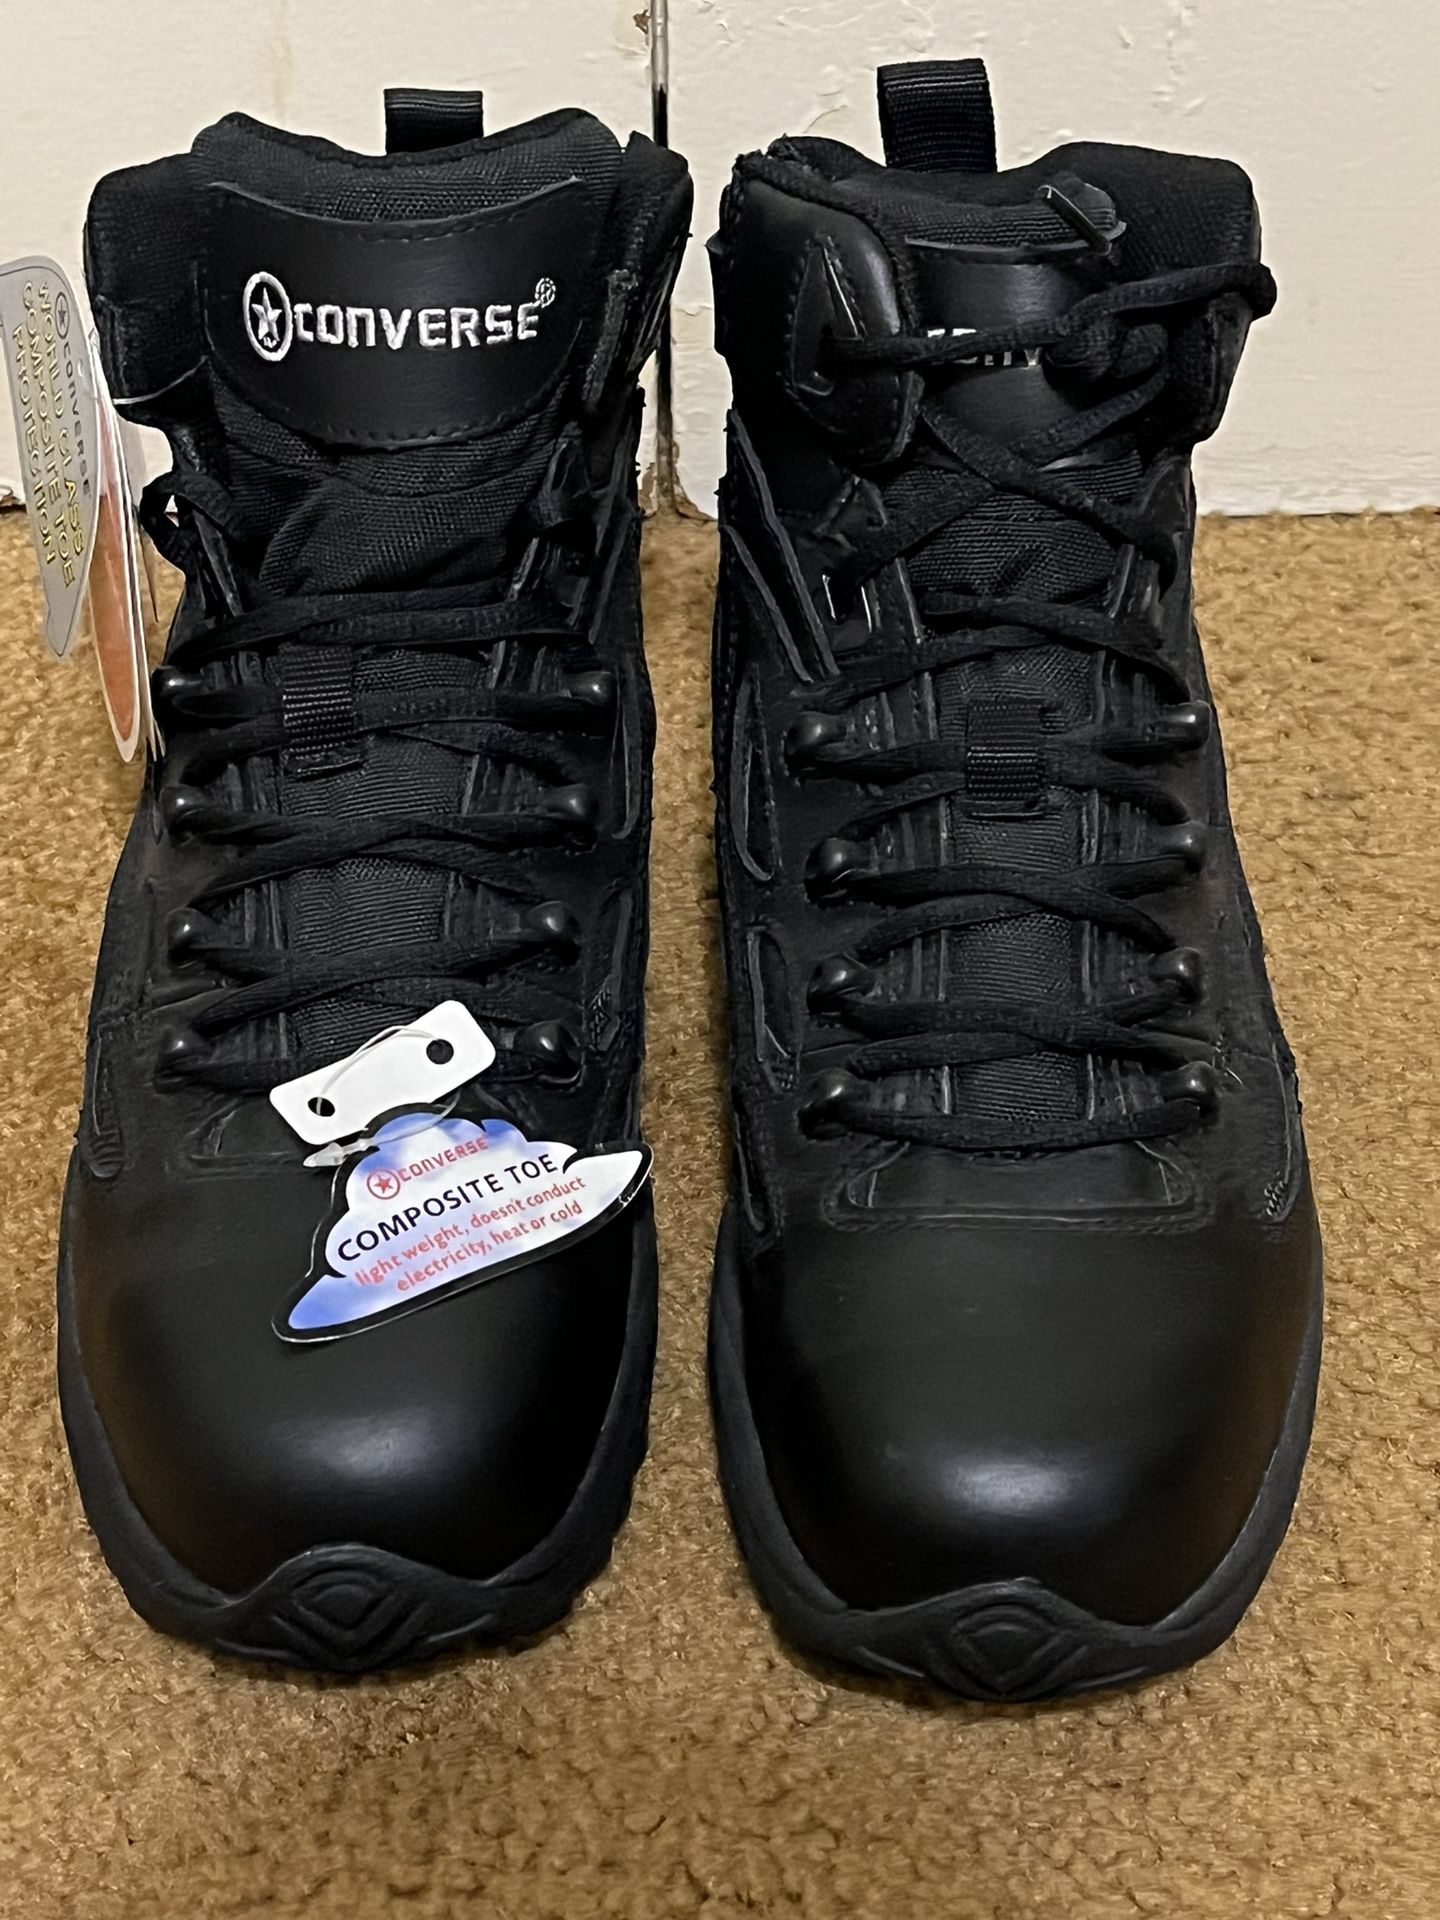 Converse 6" Composite Toe Stealth Boots with Side Zipper